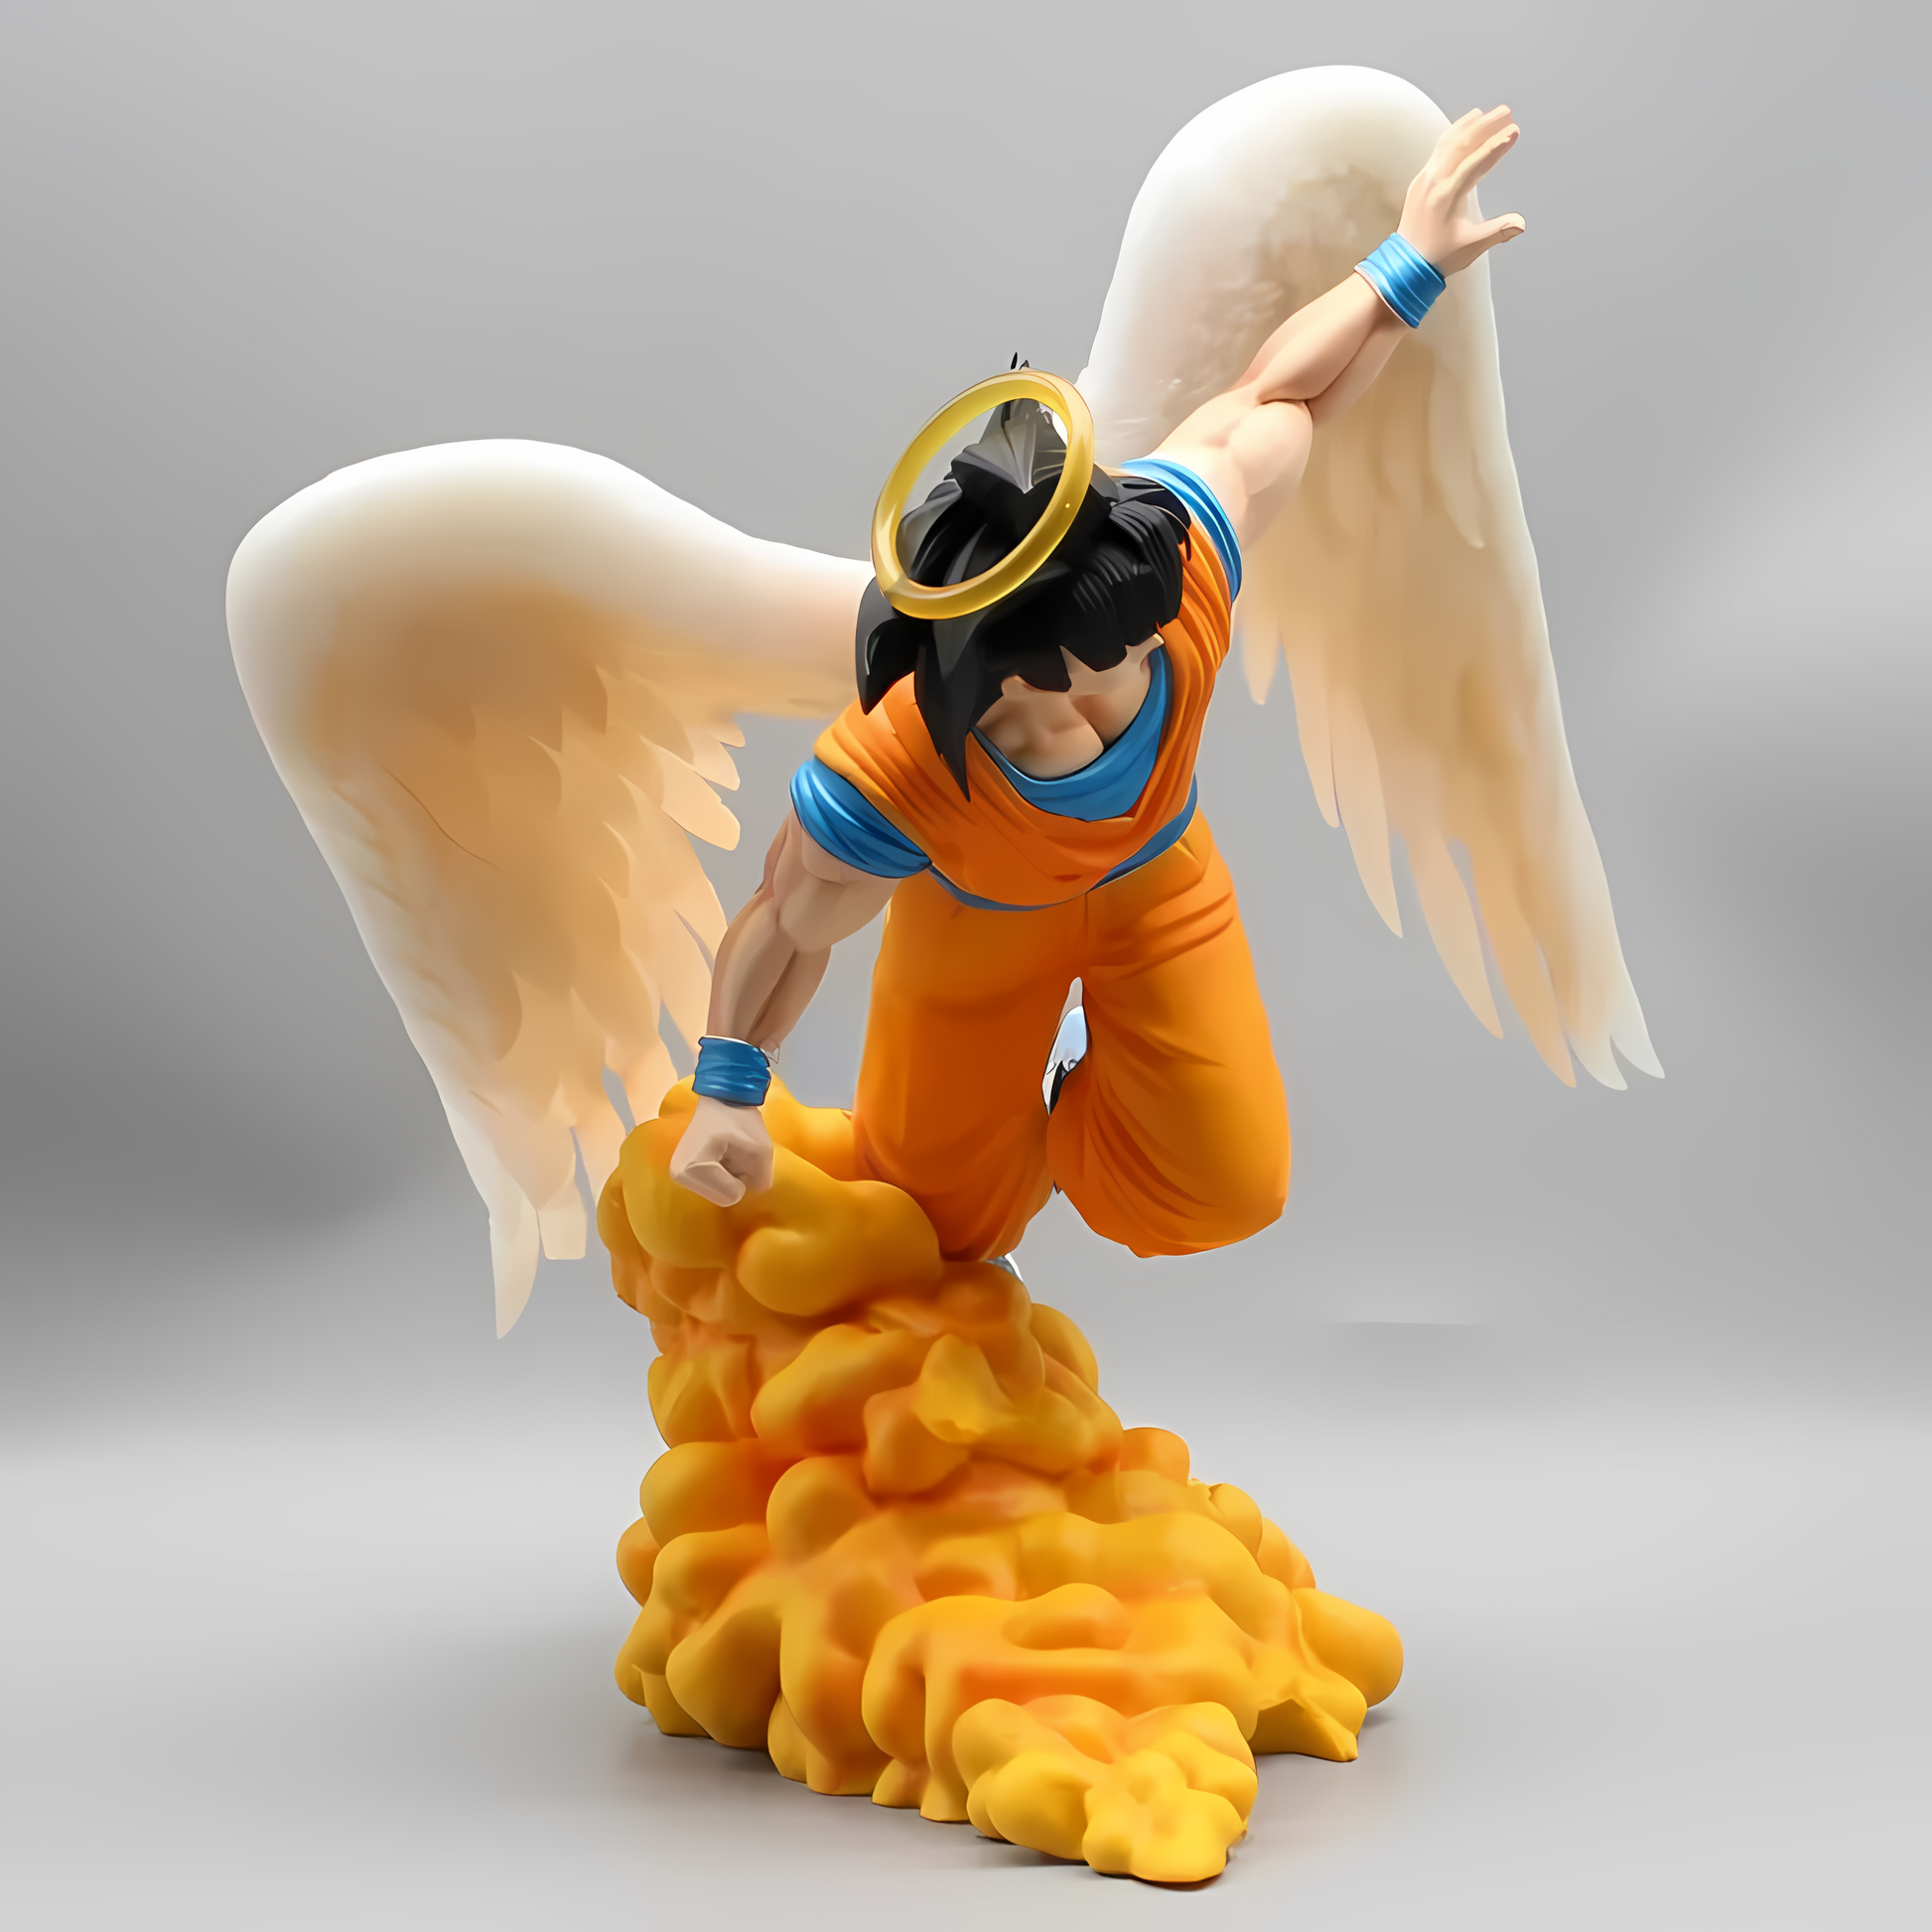 The 'Raising from Heaven Goku' figure features the iconic Dragon Ball character Goku as an angel with a halo above his head and large, feathered wings. He's in a dynamic pose, with one fist grounded on a plume of golden clouds, symbolizing ascension or divine intervention. Goku’s determined facial expression and his classic orange and blue outfit add to the dramatic representation.